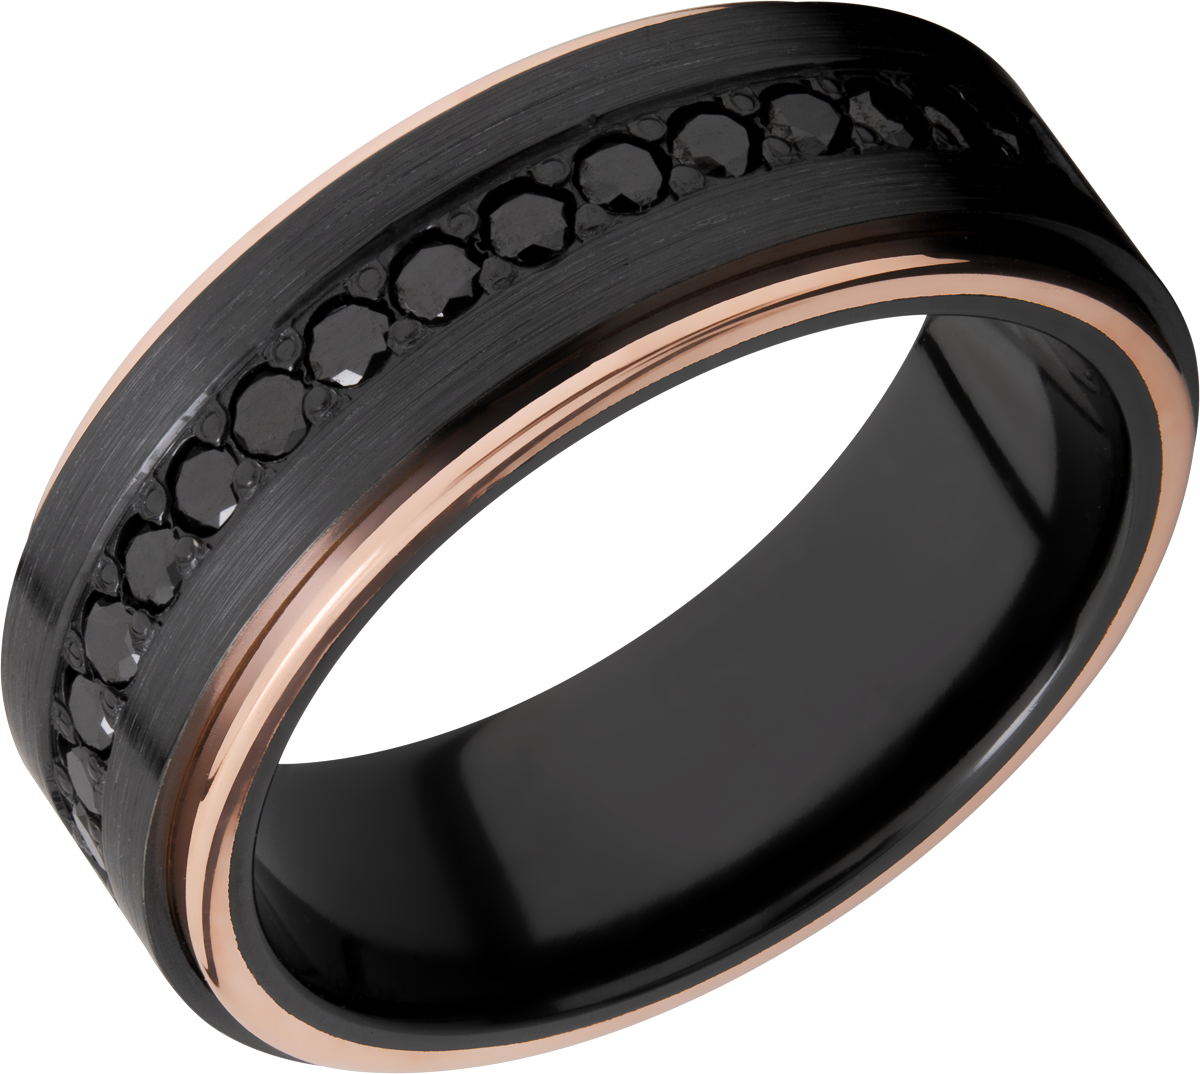 Zirconium 8mm wide flat with groove edges, edges in 14K rose gold  and 9 evenly spaces black diamon